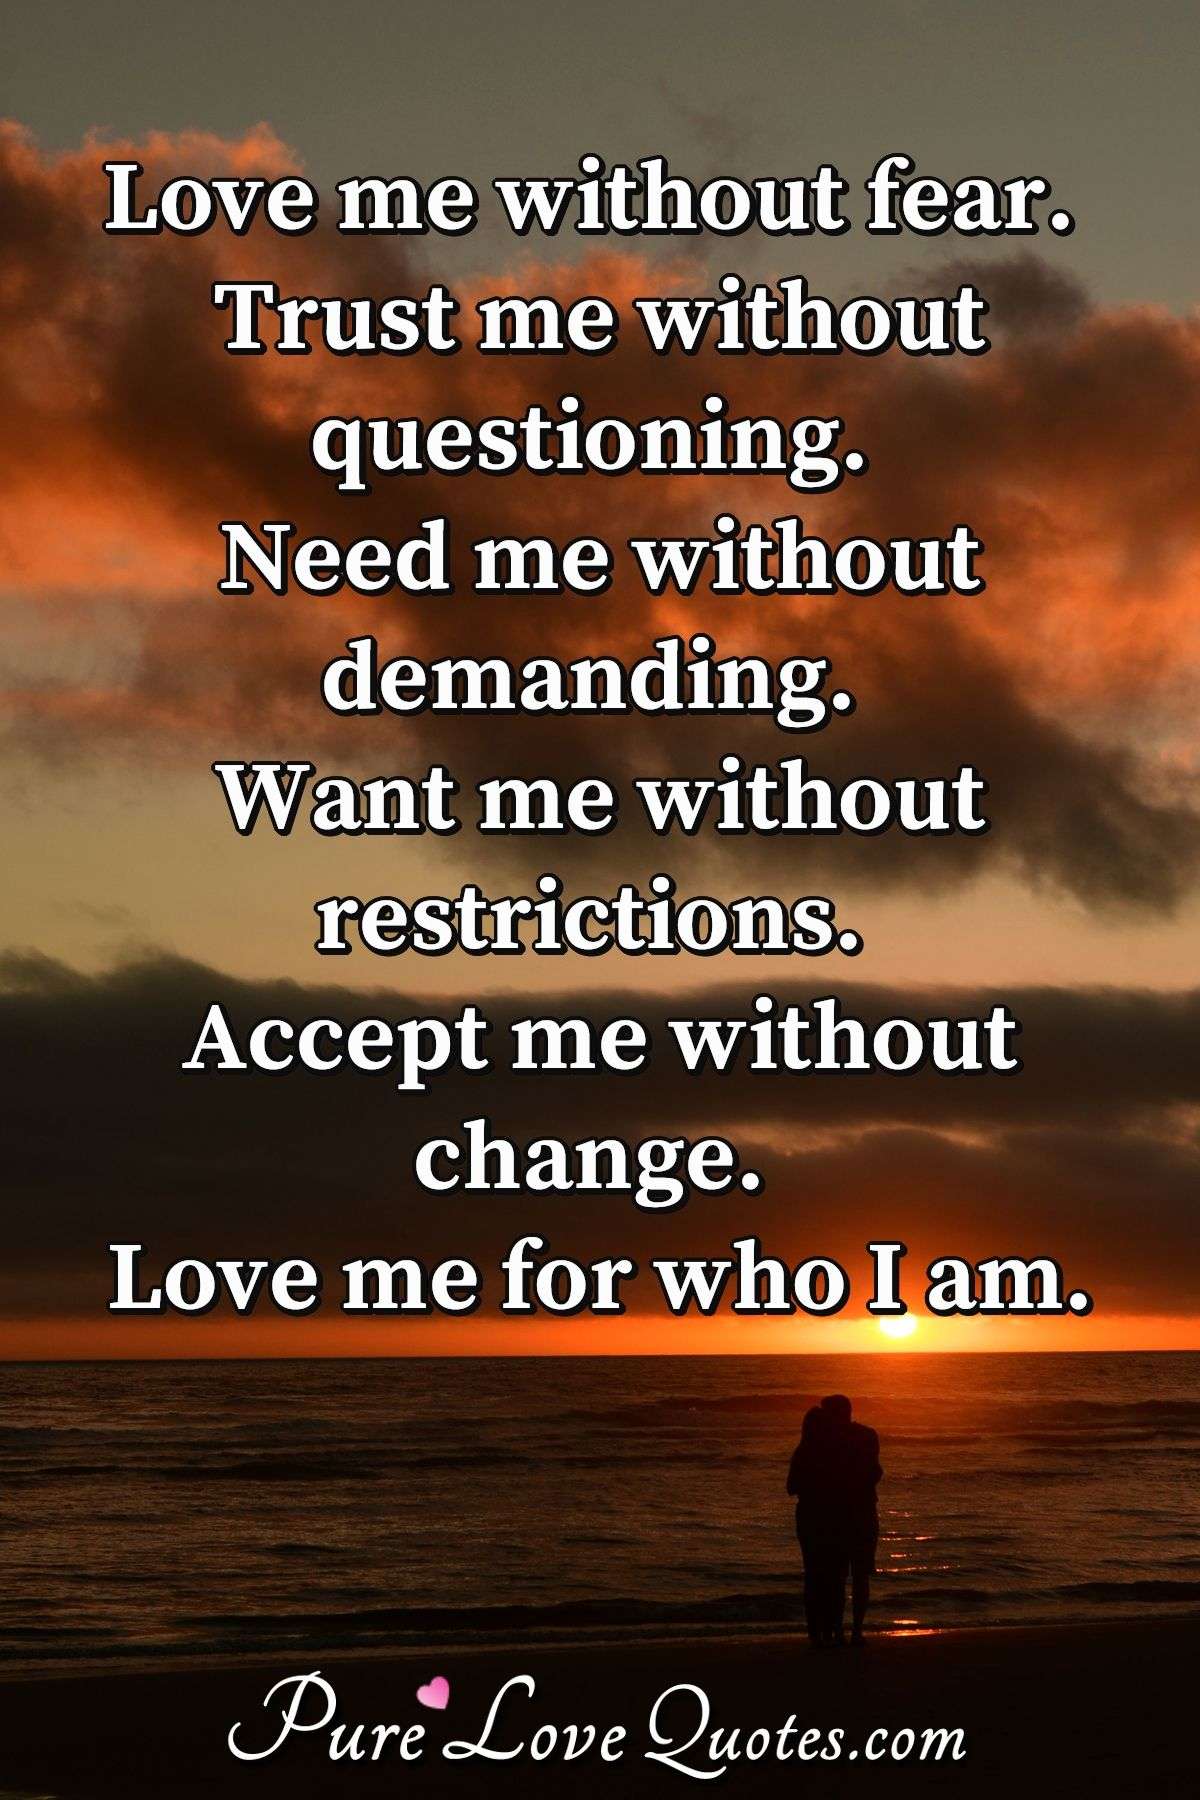 Love me without fear. Trust me without questioning. Need me without demanding. Want me without restrictions. Accept me without change. Love me for who I am. - Anonymous